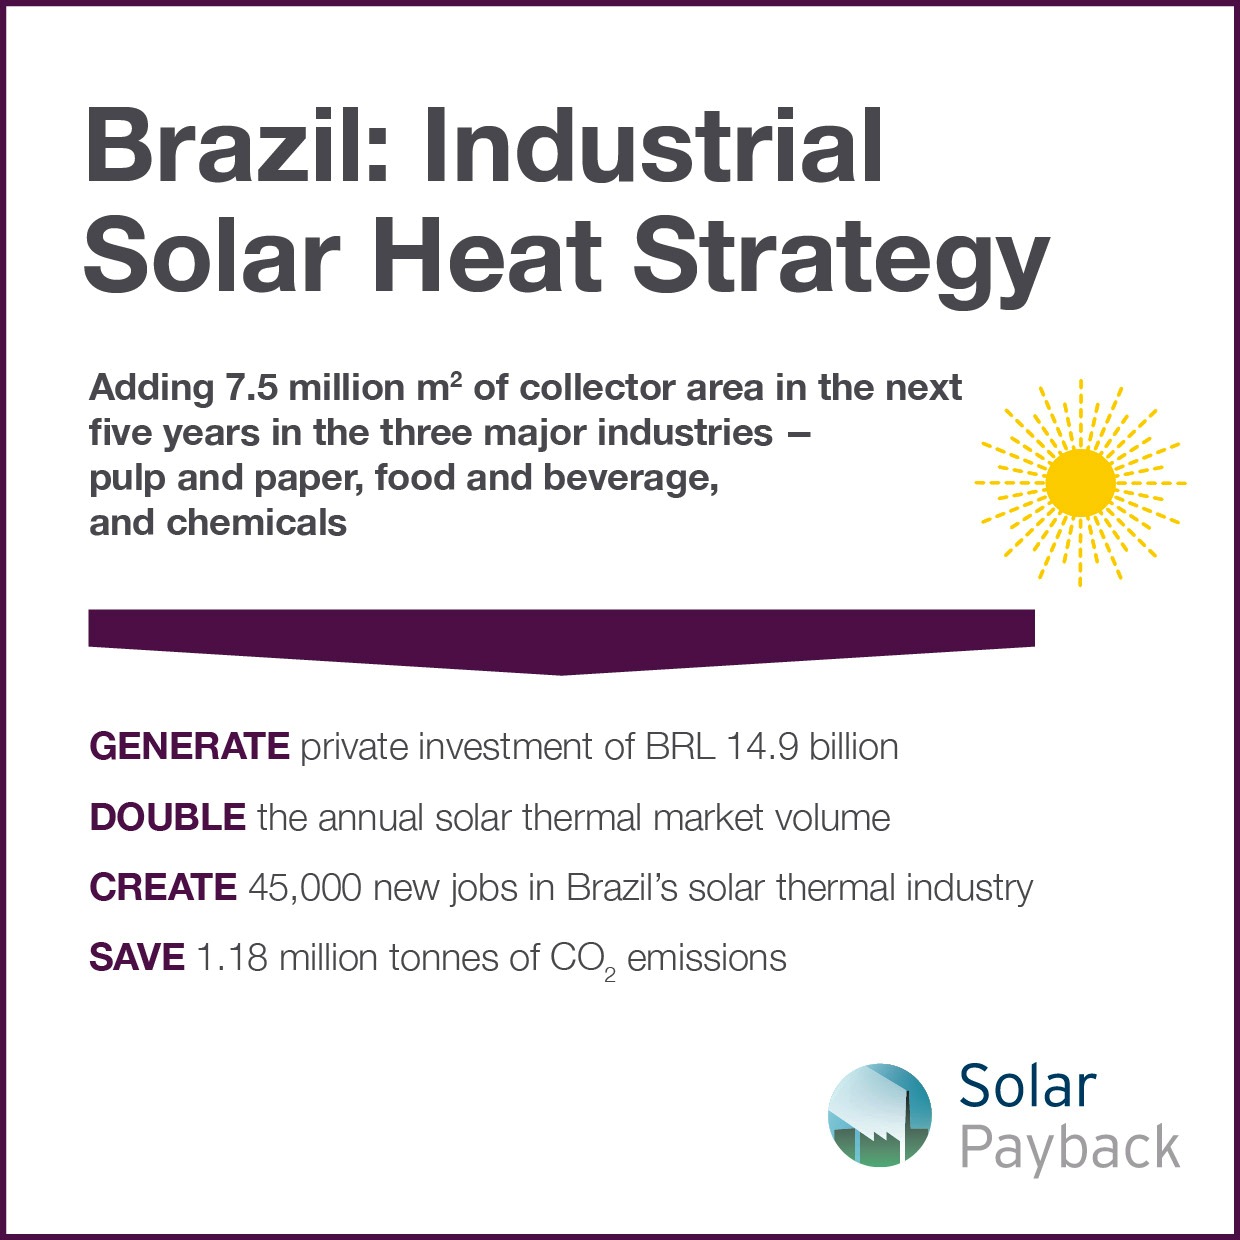 Industrial solar heat strategy and training